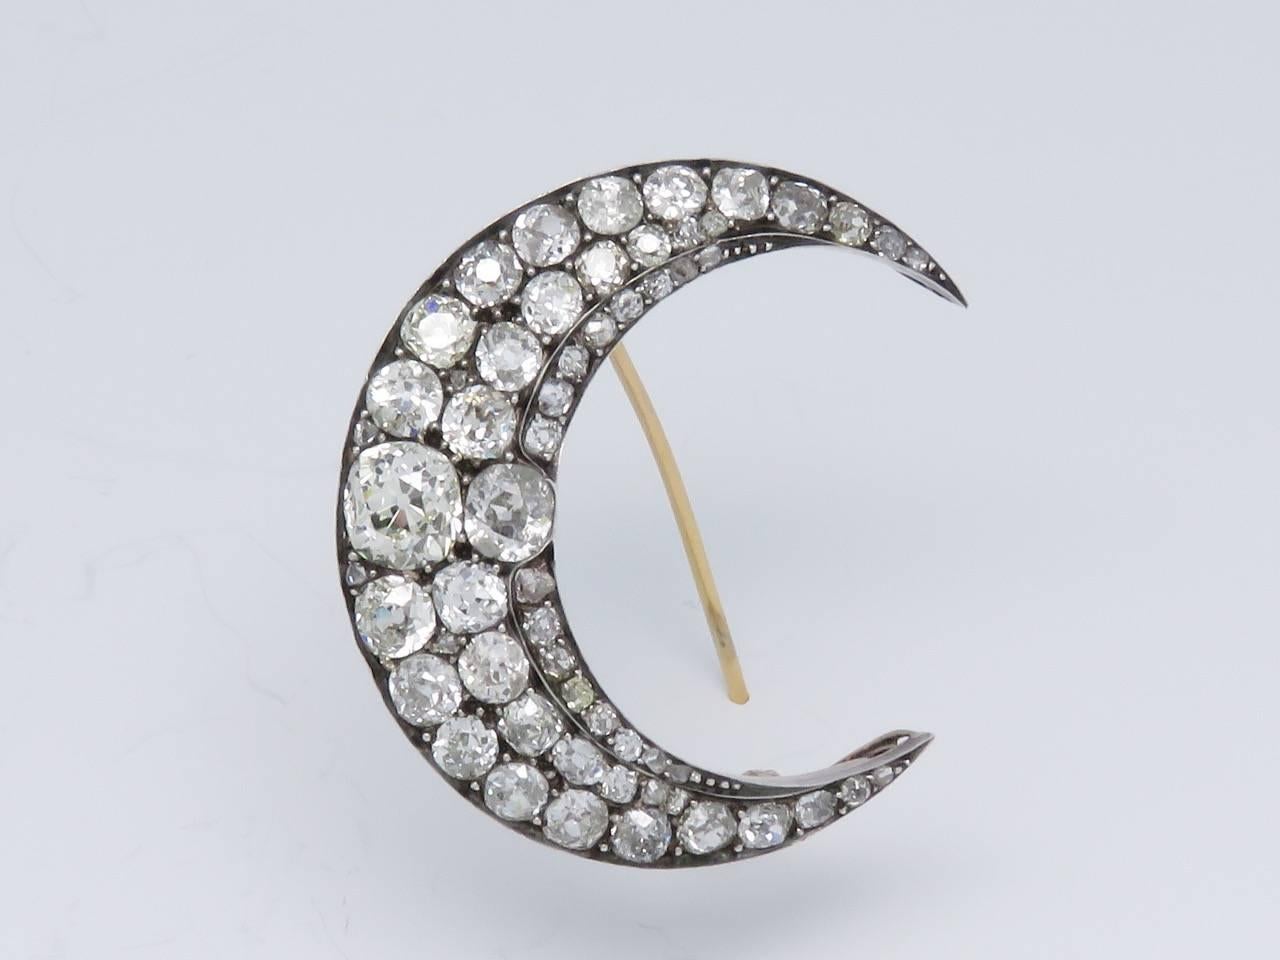 A beautiful example of a crescent brooch typical of the art Nouveau period
Set in silver and 18k yellow gold.
Diamond:
Weight: 9 carats in total.

French Make

Measurements:
Length: 17.32 inches ( 44mm )
Width :  17.32 inches ( 44mm)
Weight: 13.85